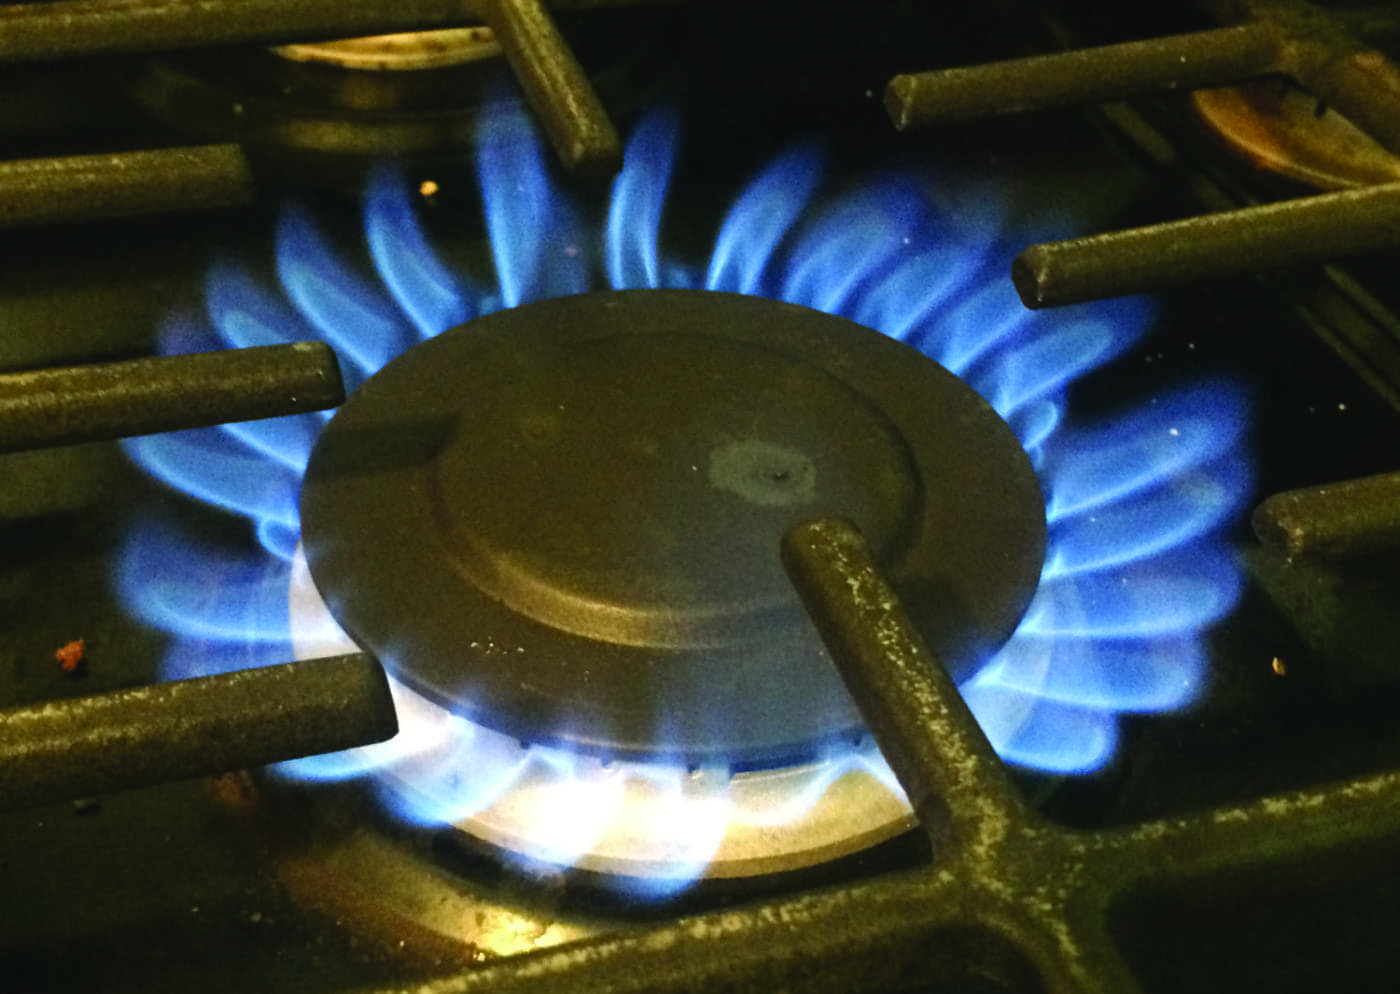 Gas-stove-burner-1400x994, Turning off the gas, Featured Local News & Views 